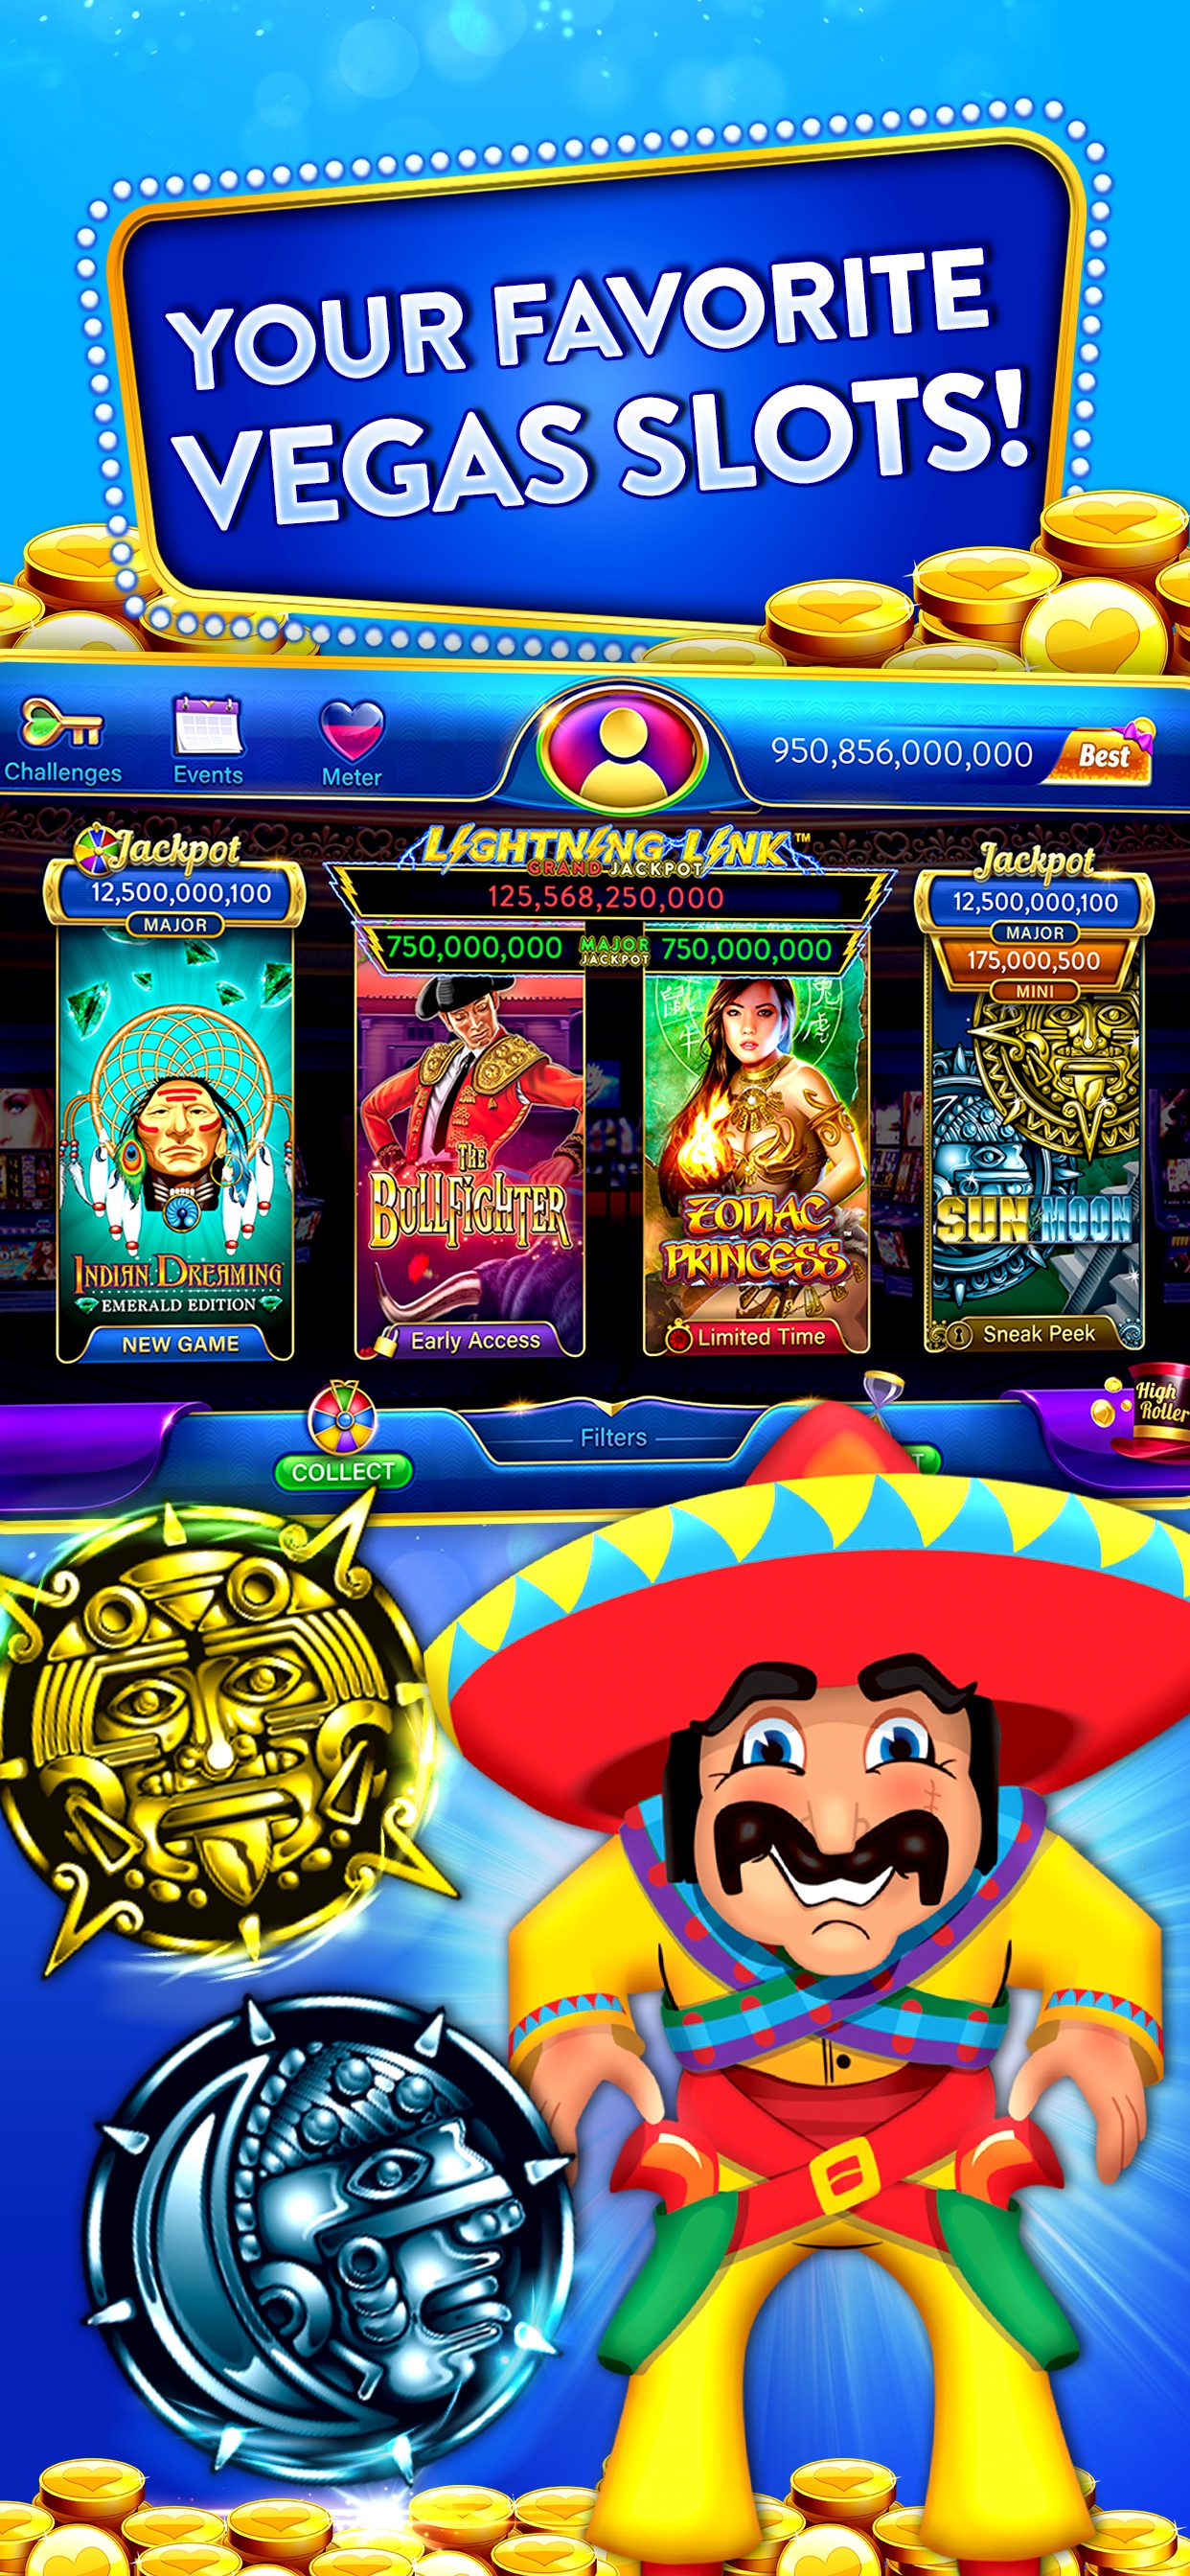 Heart Of Vegas Real Casino Slots Free Coins